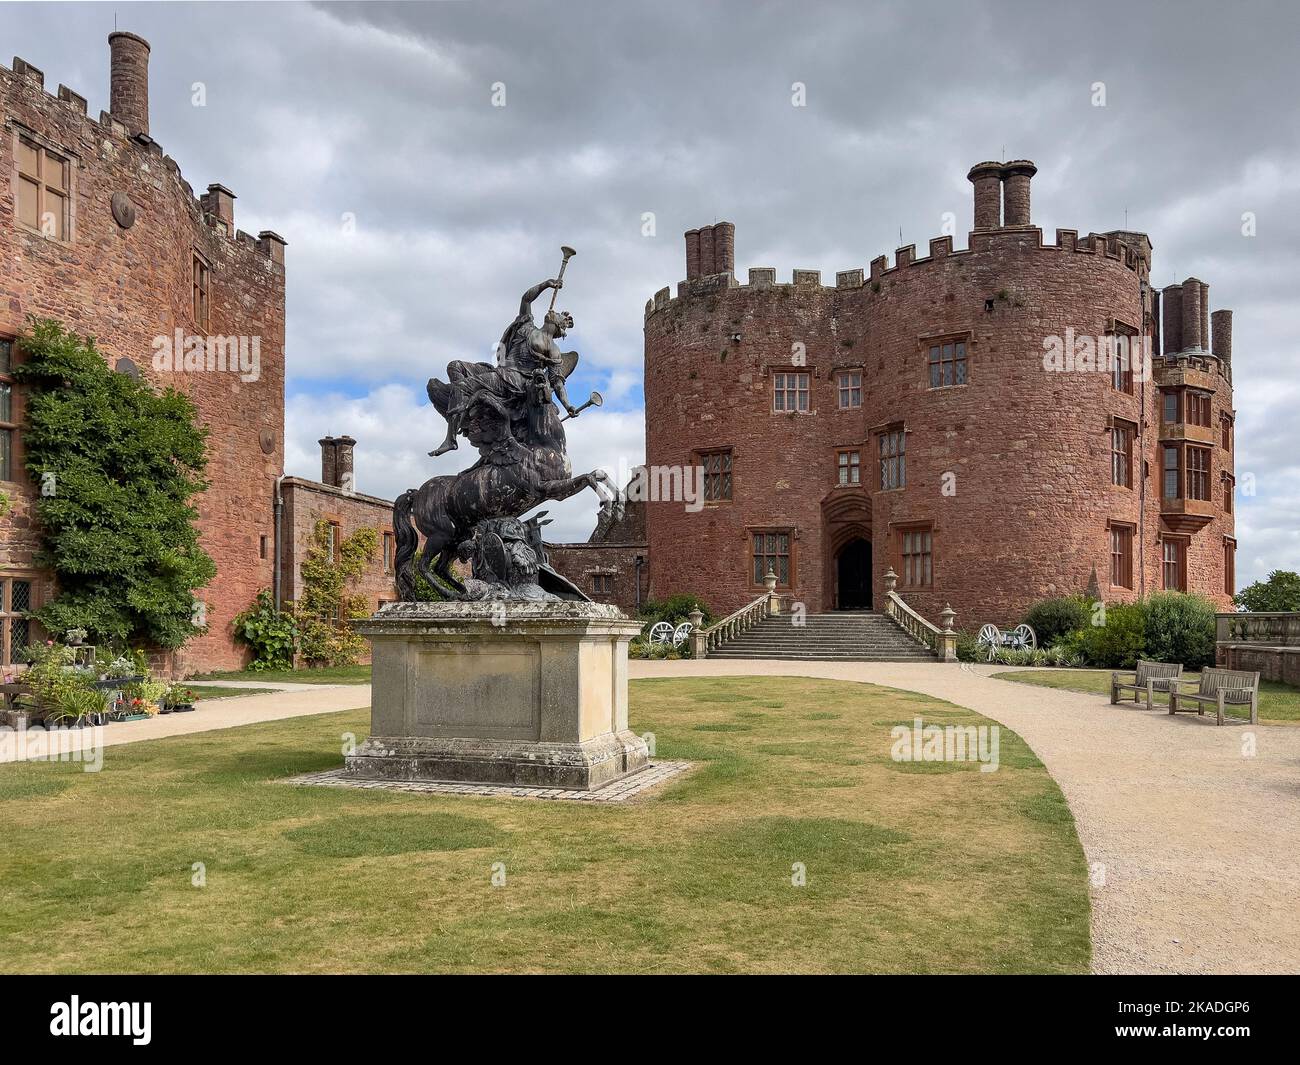 Powis Castle - a medieval castle, fortress and grand country house near Welshpool, in Powys, Wales. Stock Photo